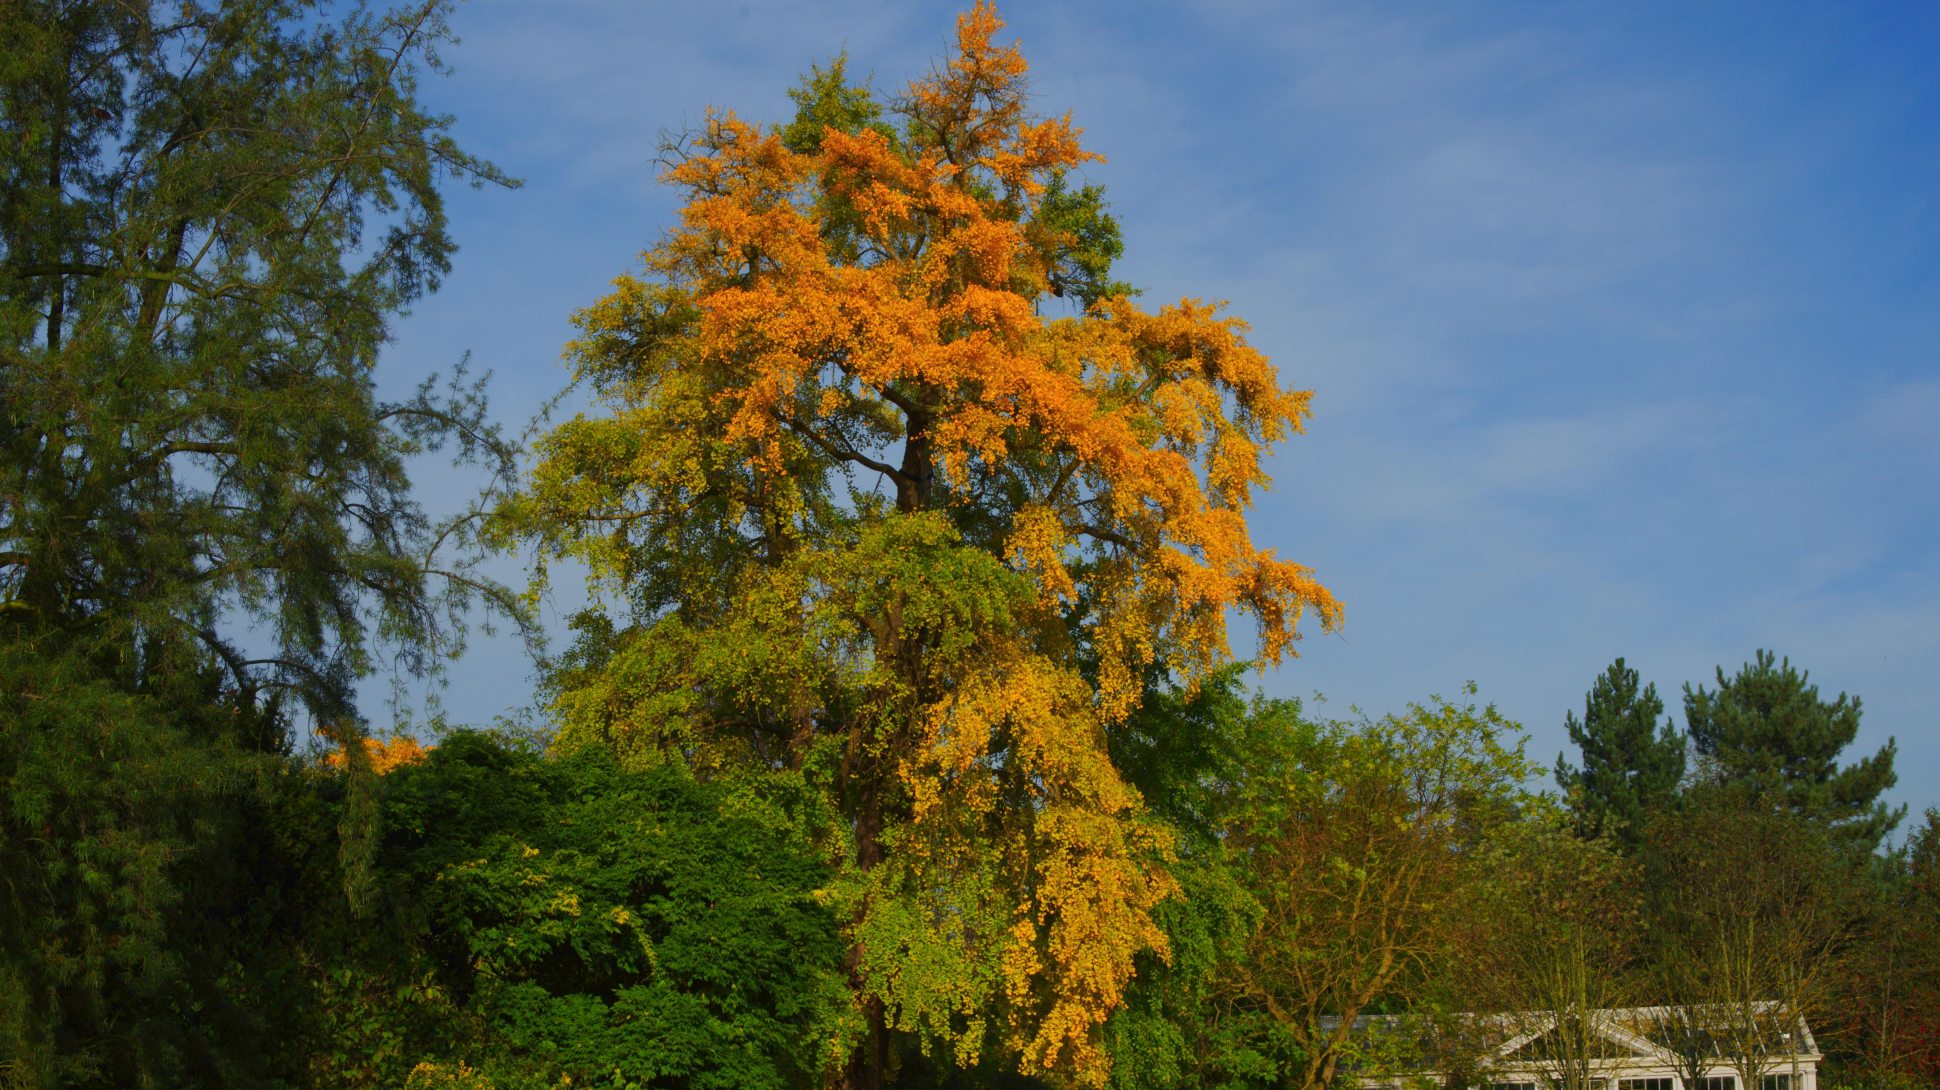 The 'Old Lion' maidenhair tree (Ginkgo biloba) at Kew with yellow and green leaves